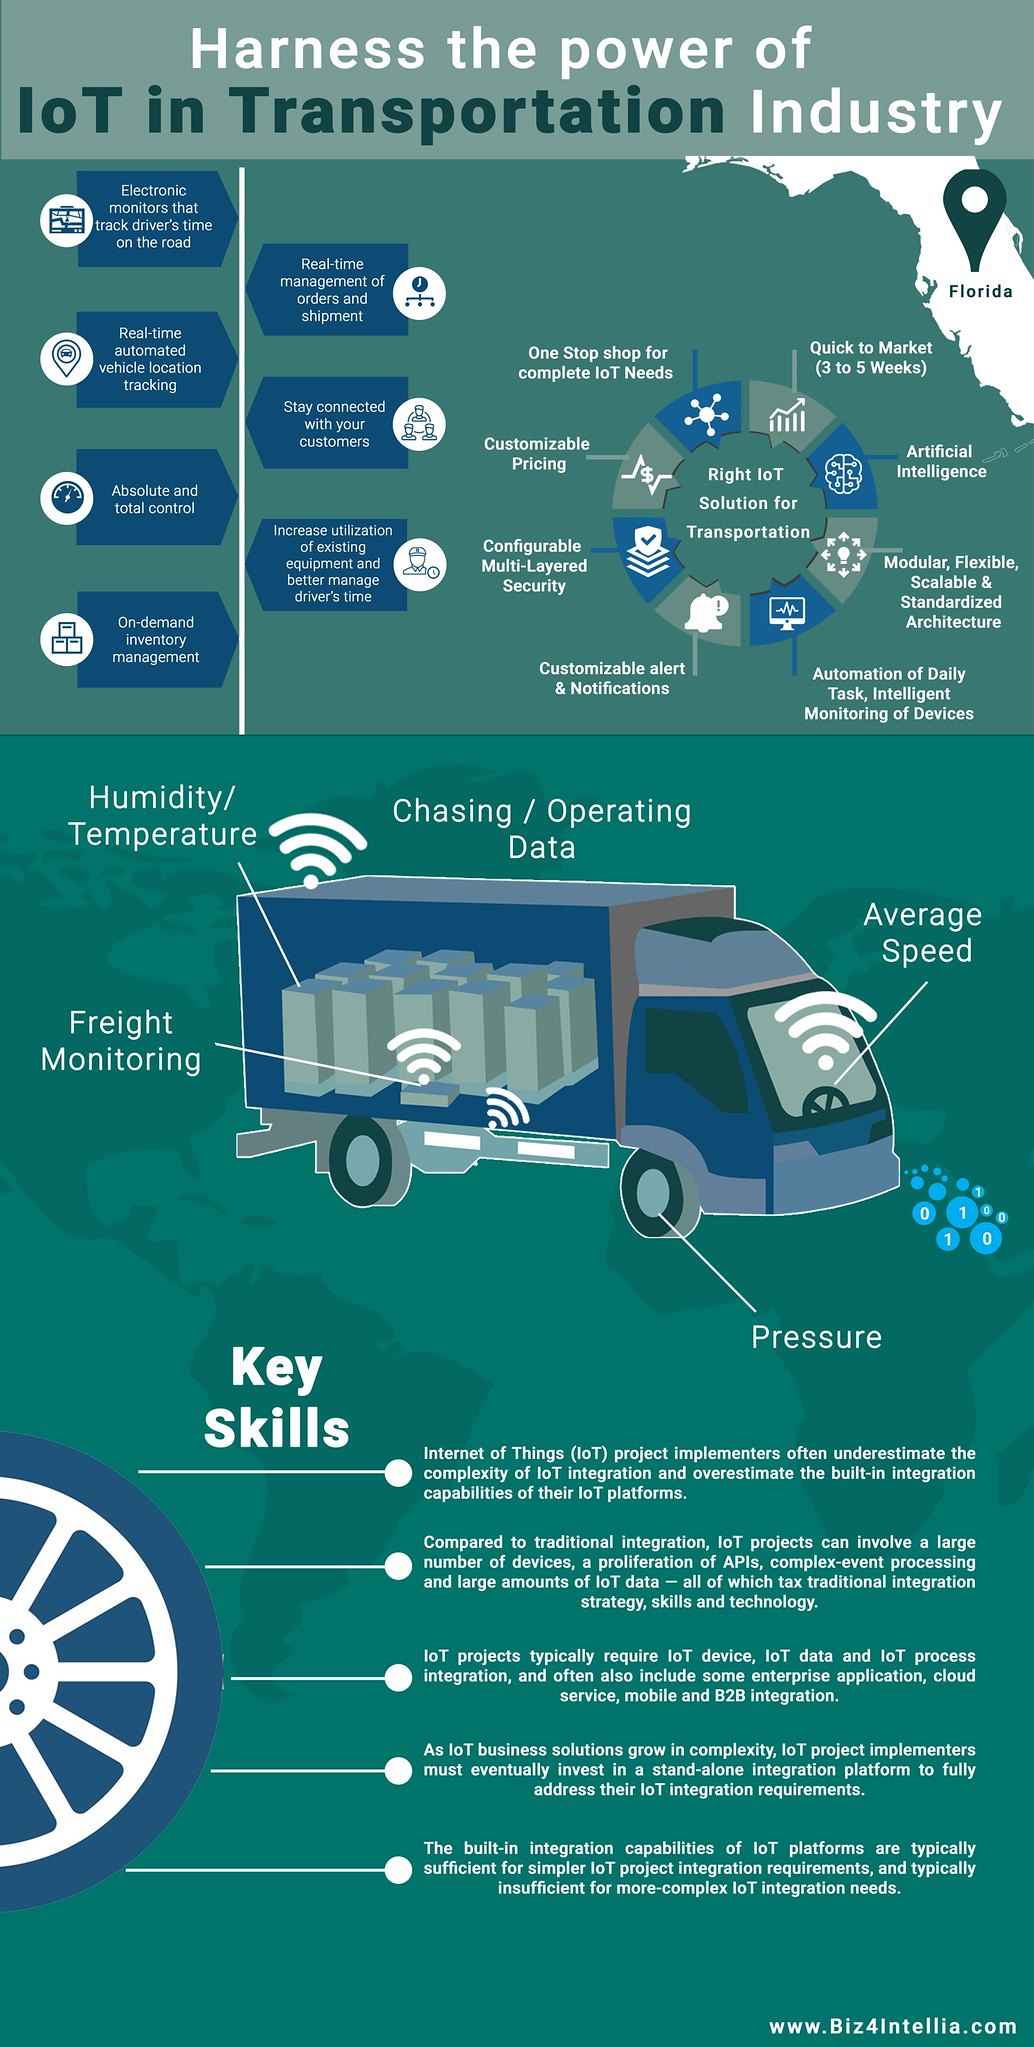 Harness the Power of IoT in Transportation Industry